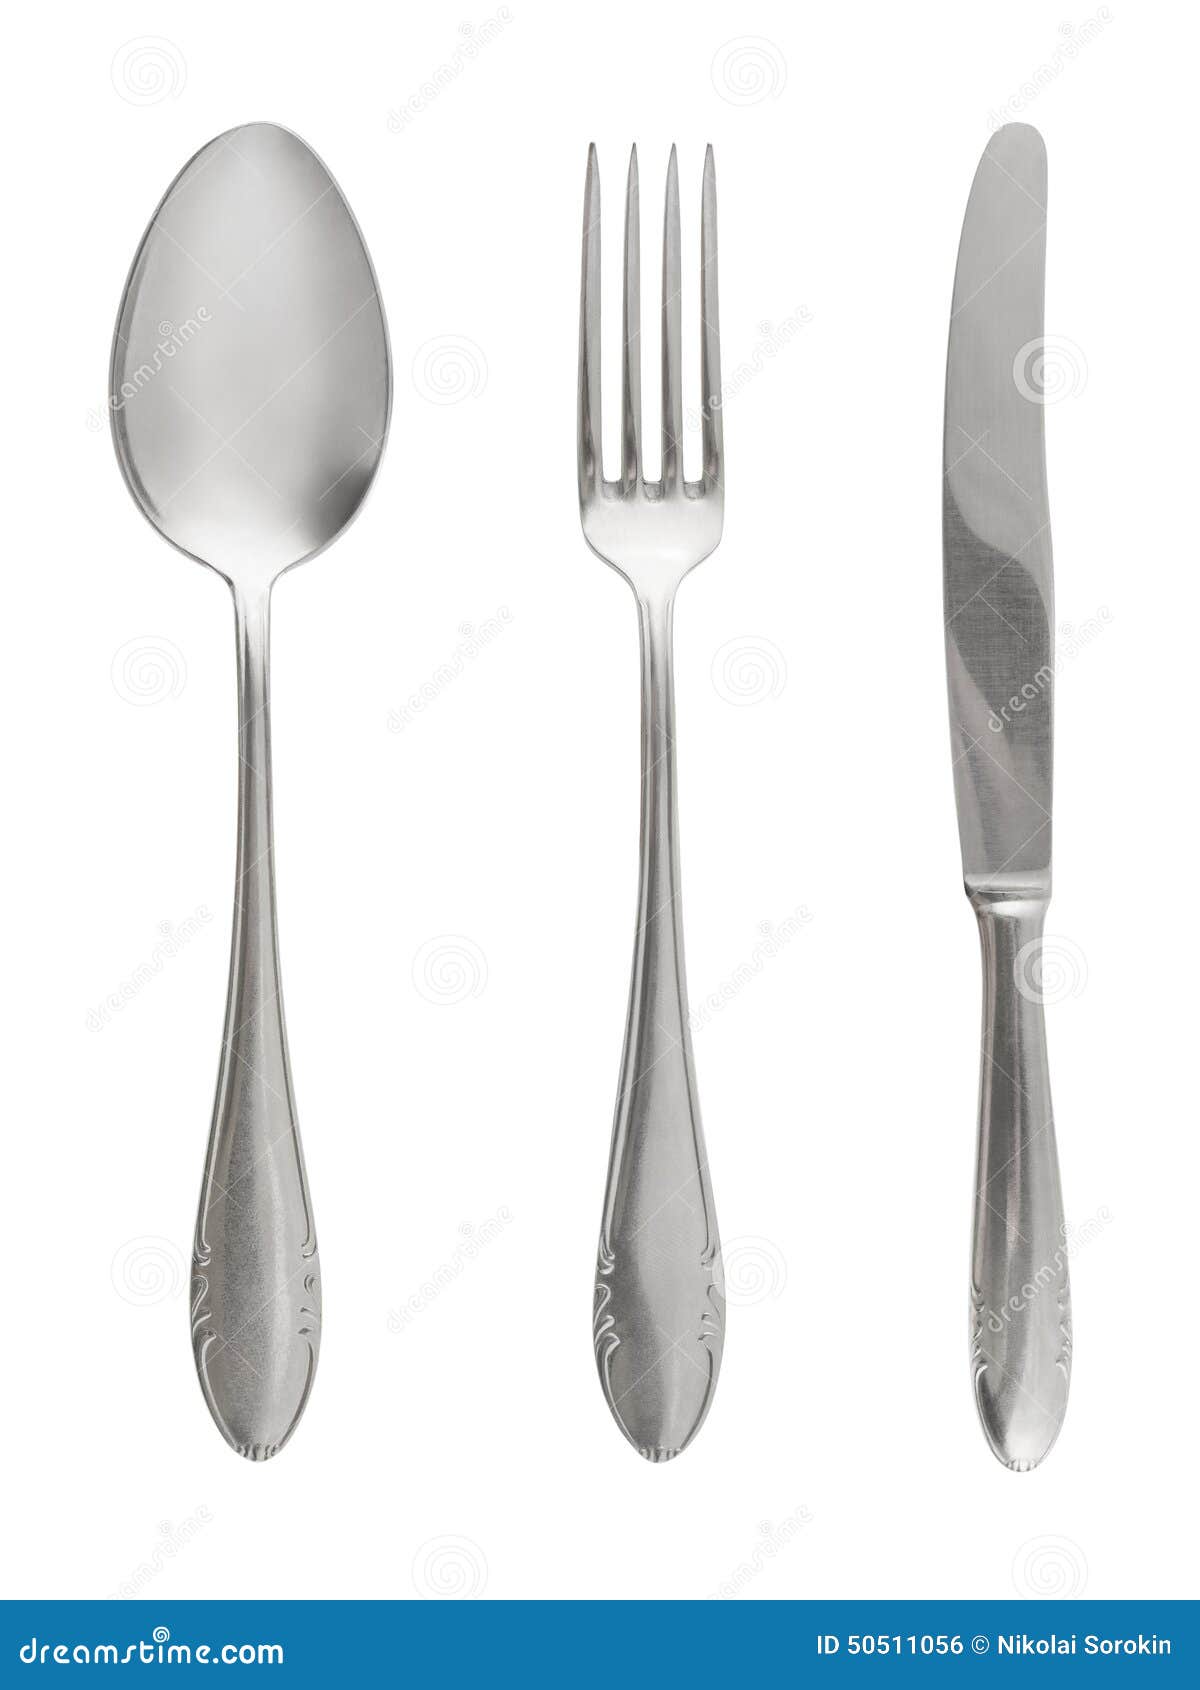 fork, spoon and knife